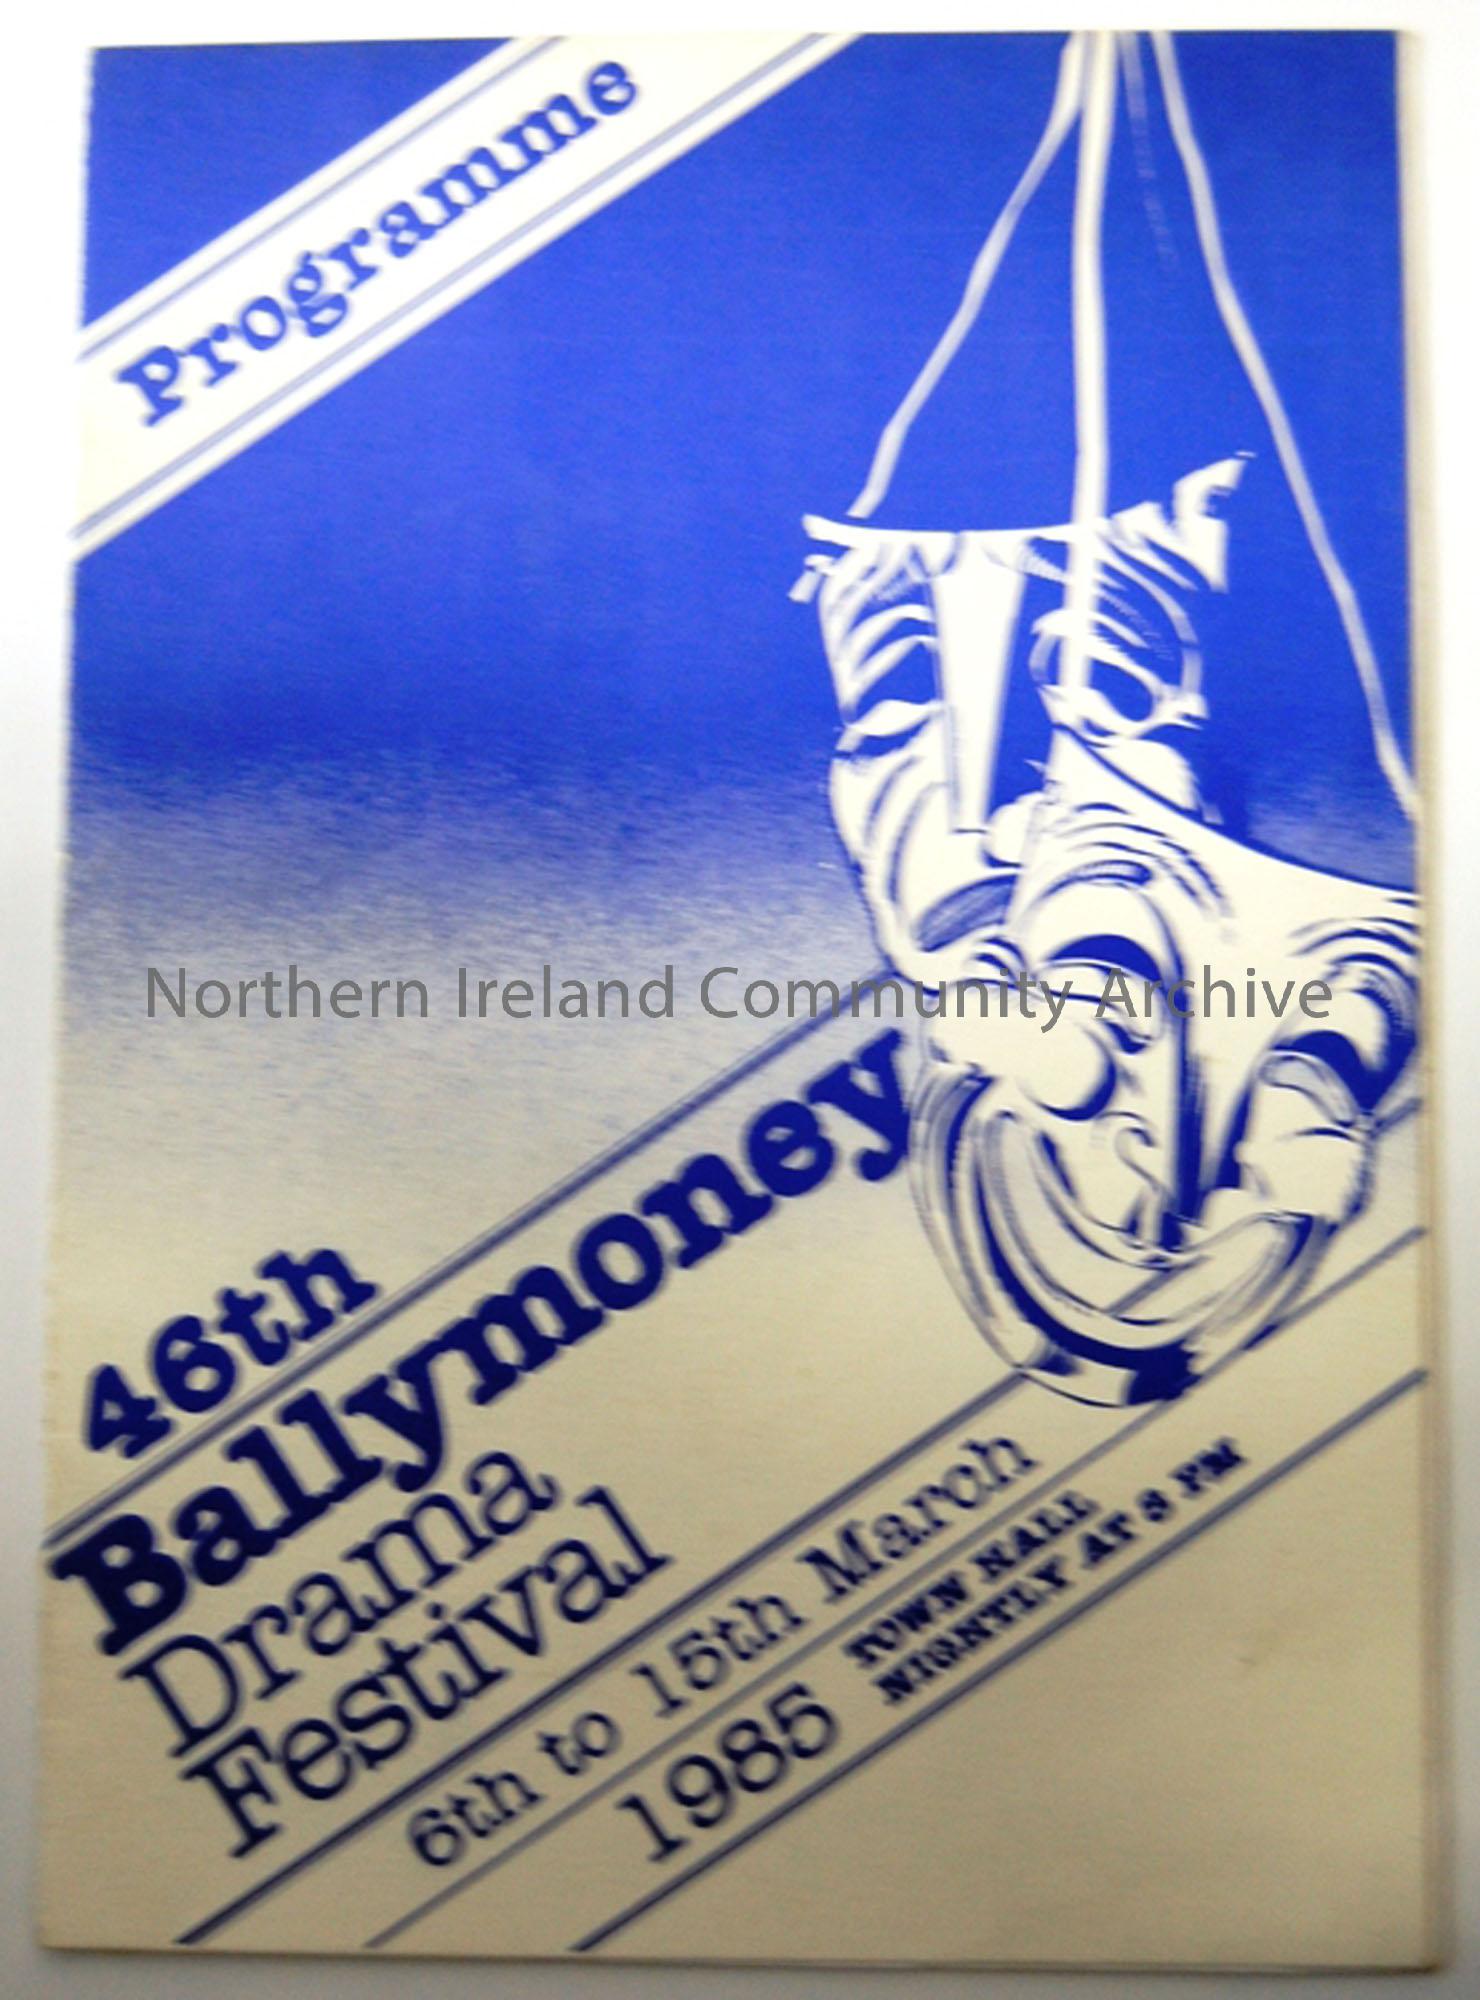 Programme of 46th Ballymoney Drama Festival,1985, 6th to 15th March Town hall nightly at 8pm